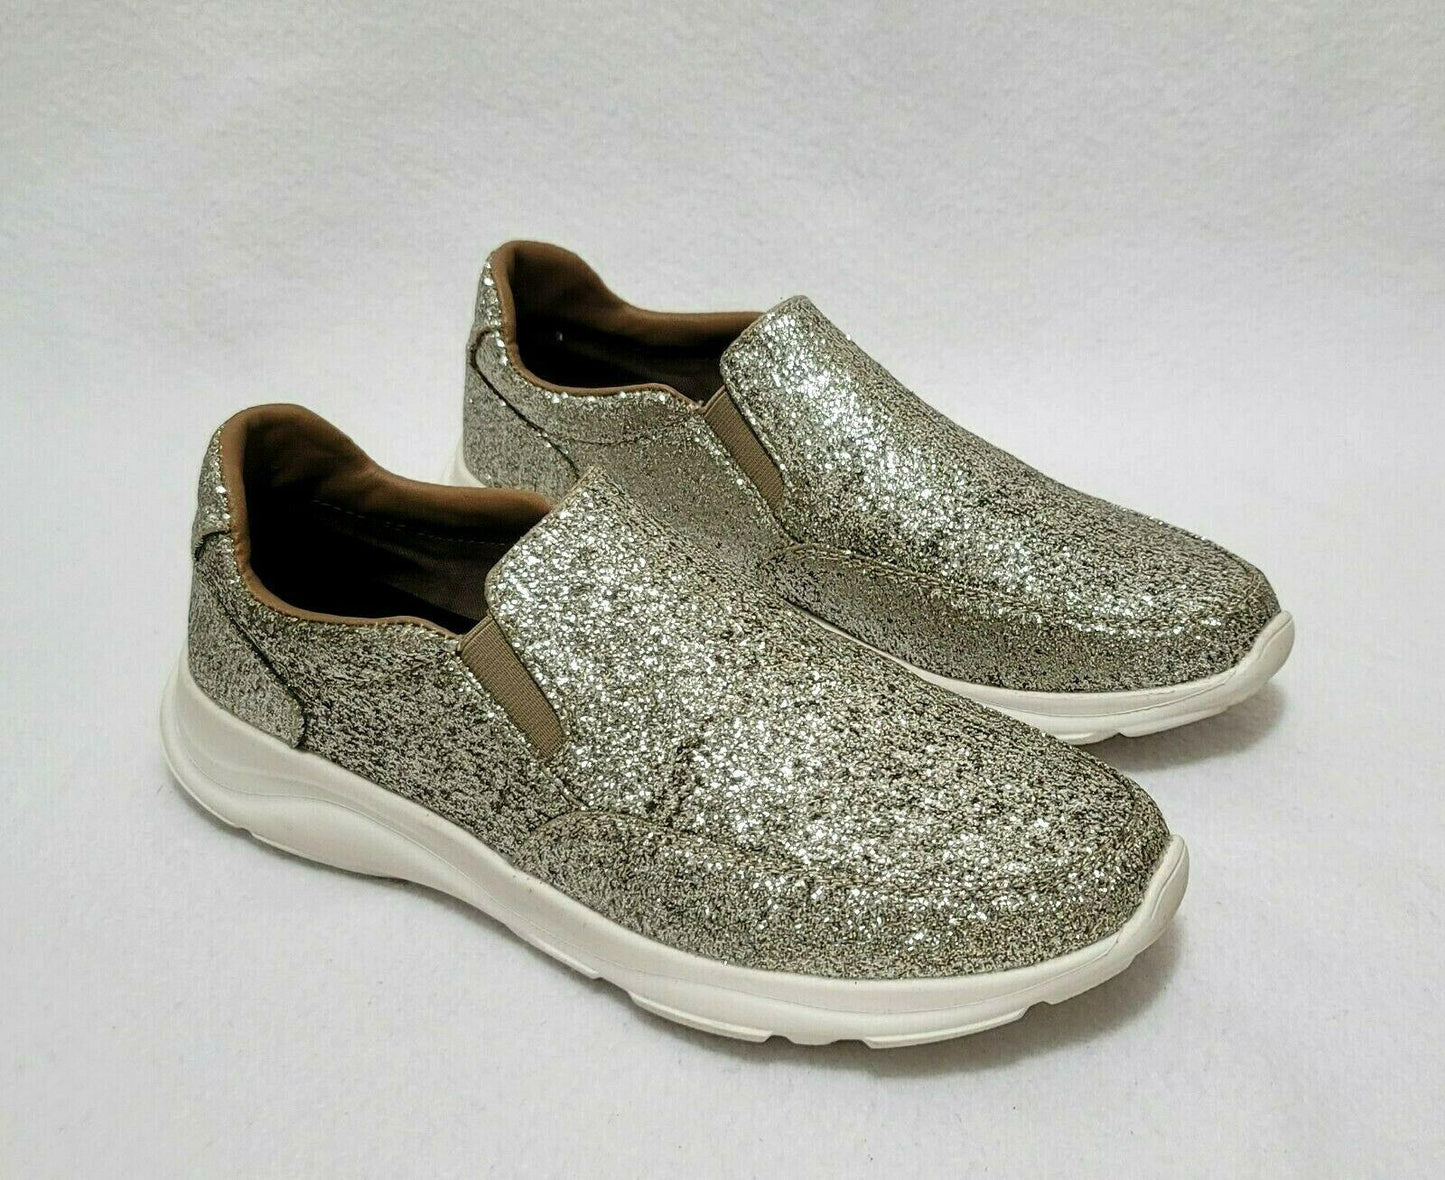 Joy & Mario Womens Shoes Slip On Glitter Gold Sneakers Size US 8 - SVNYFancy